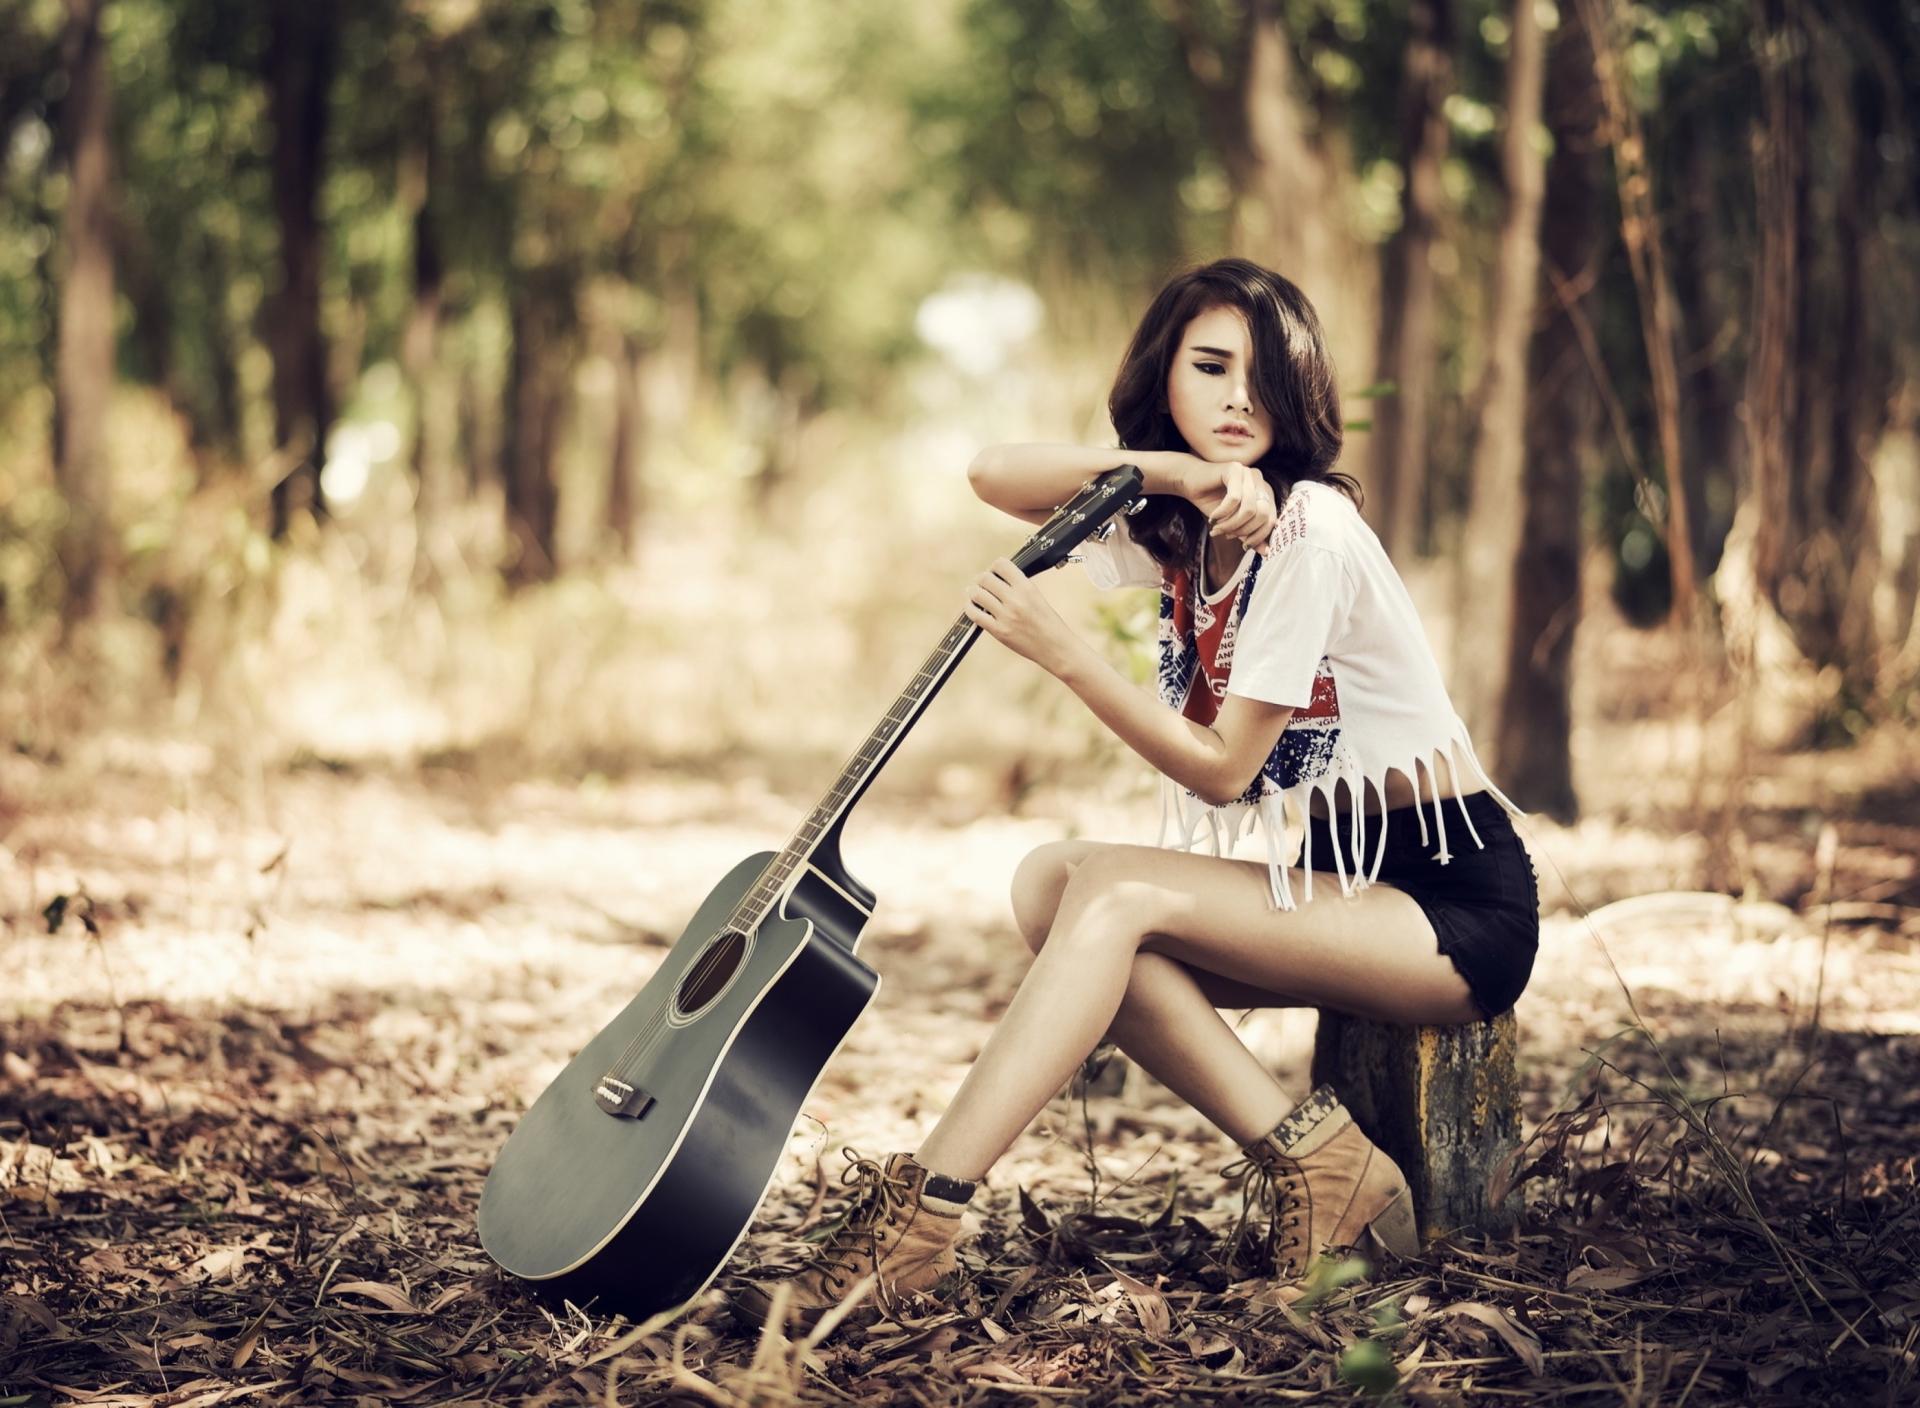 Pretty Brunette Model With Guitar At Meadow wallpaper 1920x1408